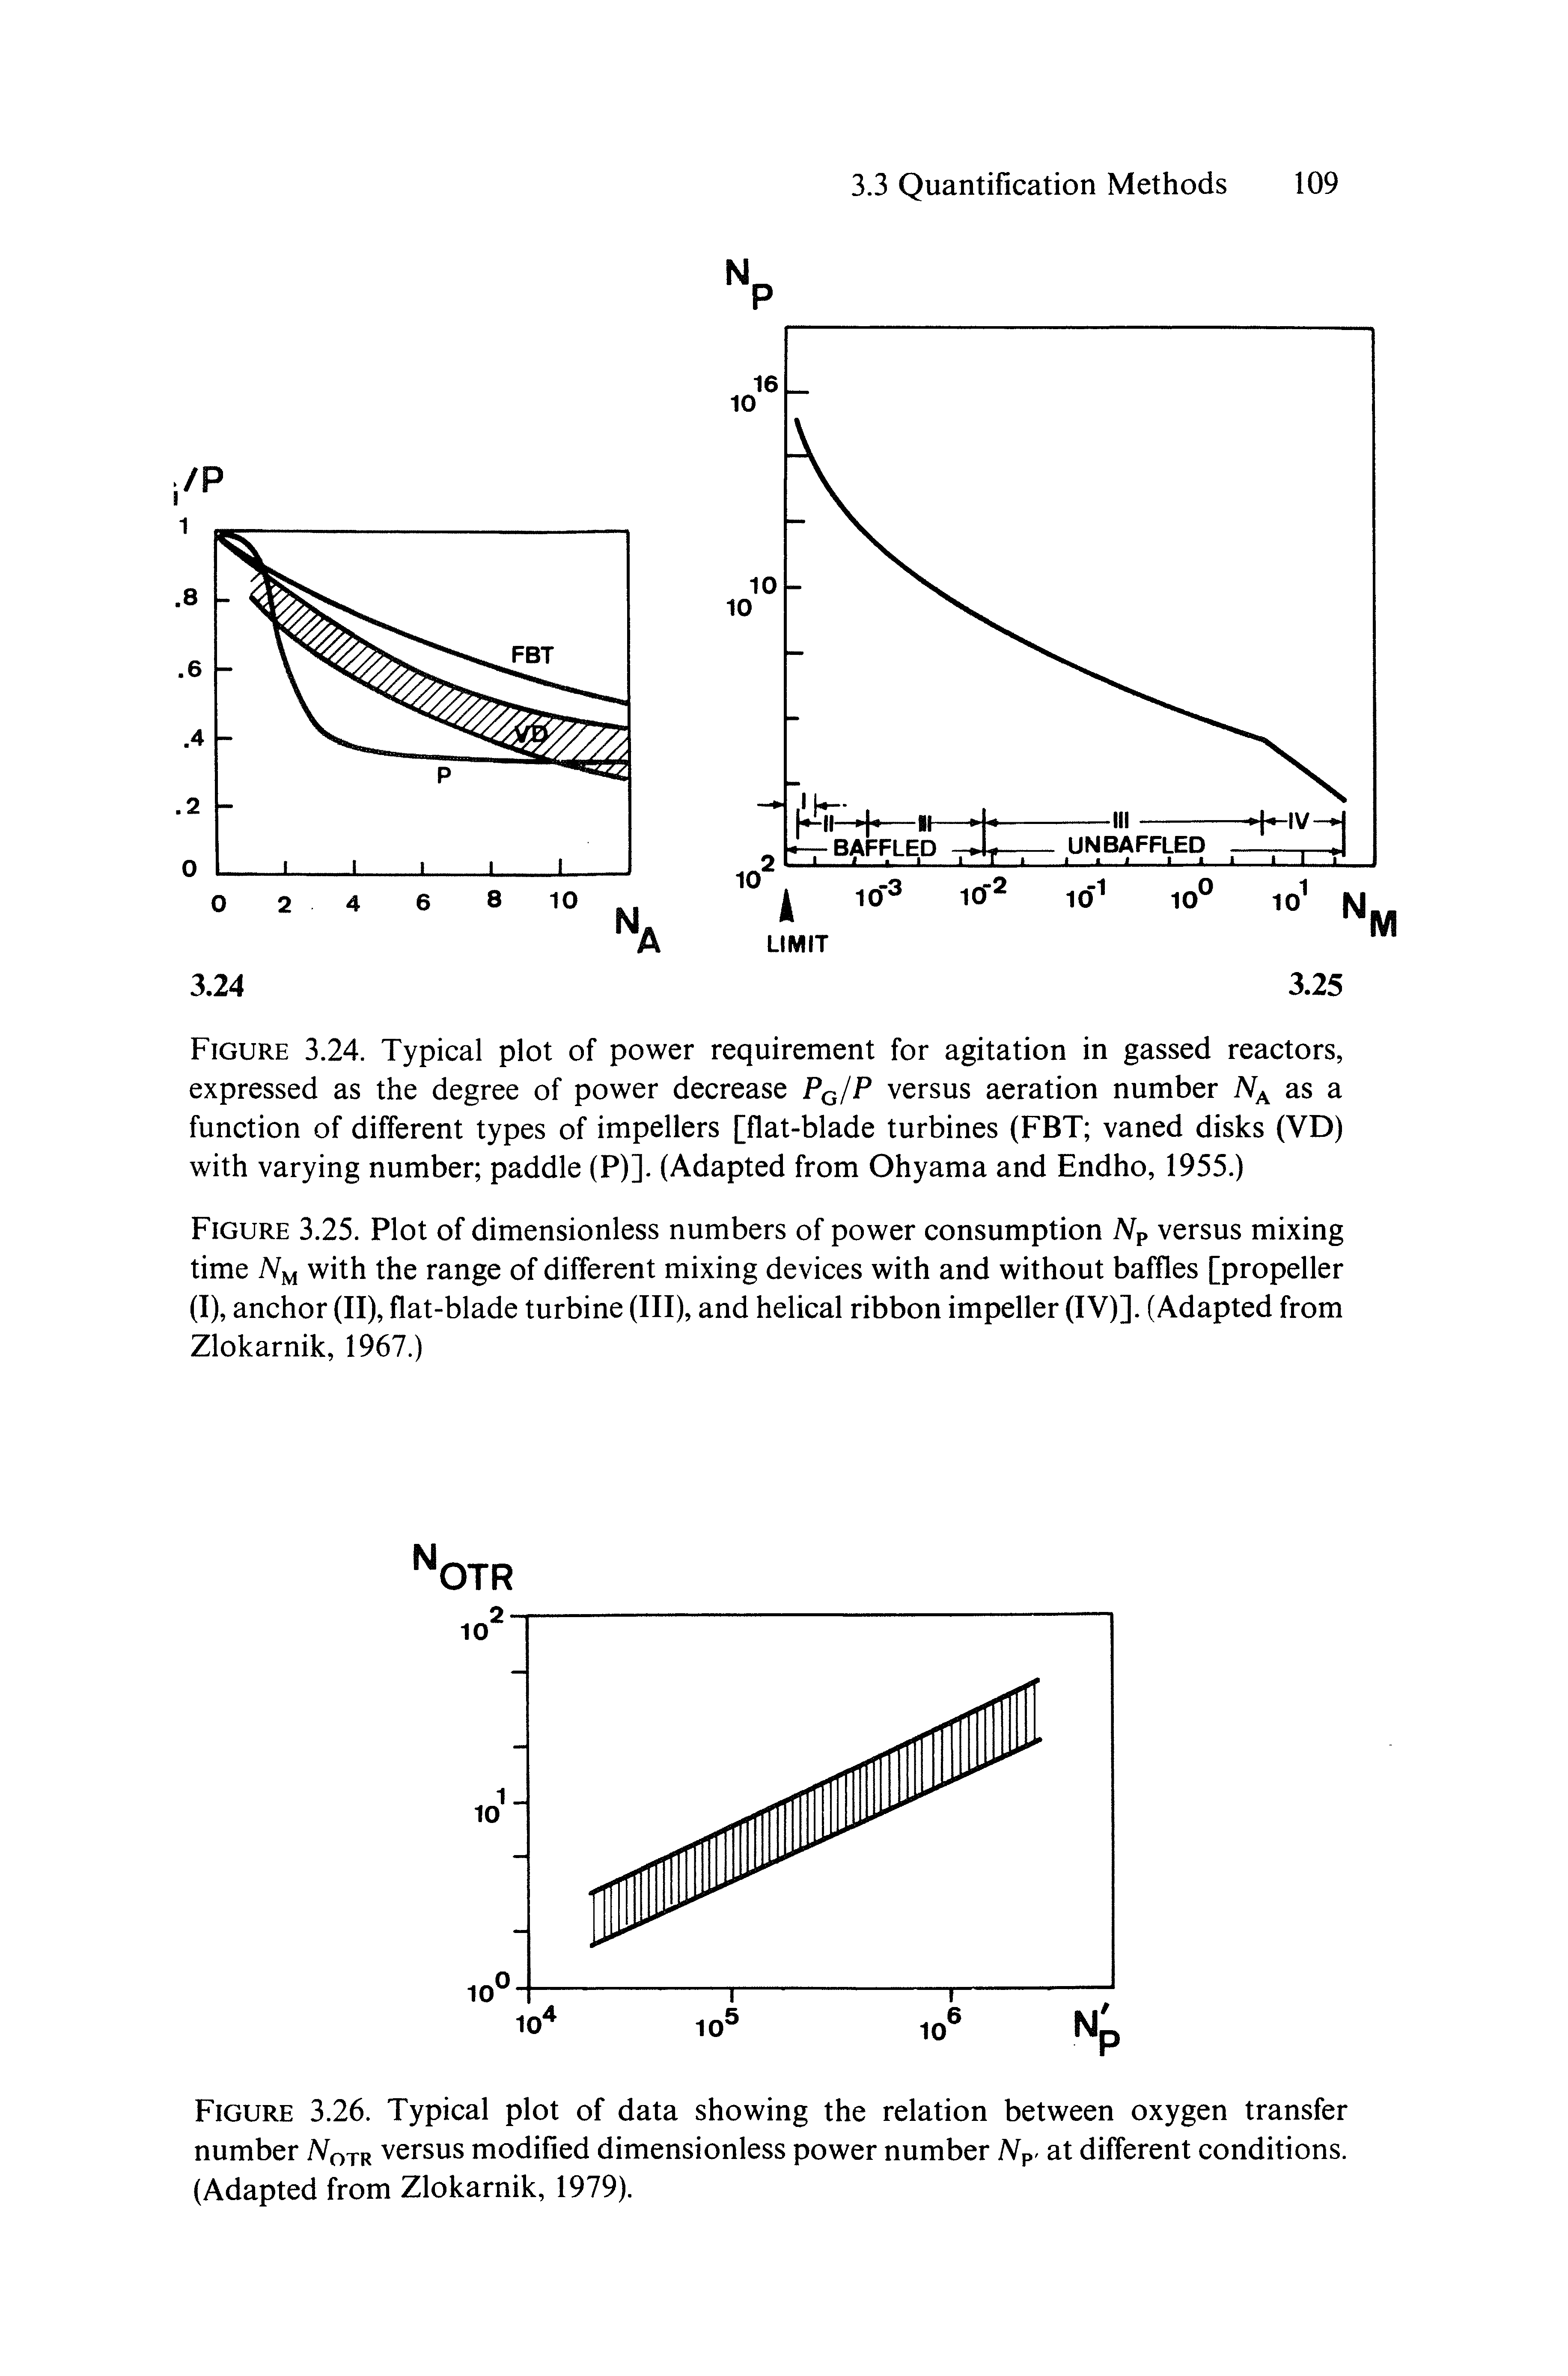 Figure 3.26. Typical plot of data showing the relation between oxygen transfer number ATotr versus modified dimensionless power number at different conditions. (Adapted from Zlokarnik, 1979).